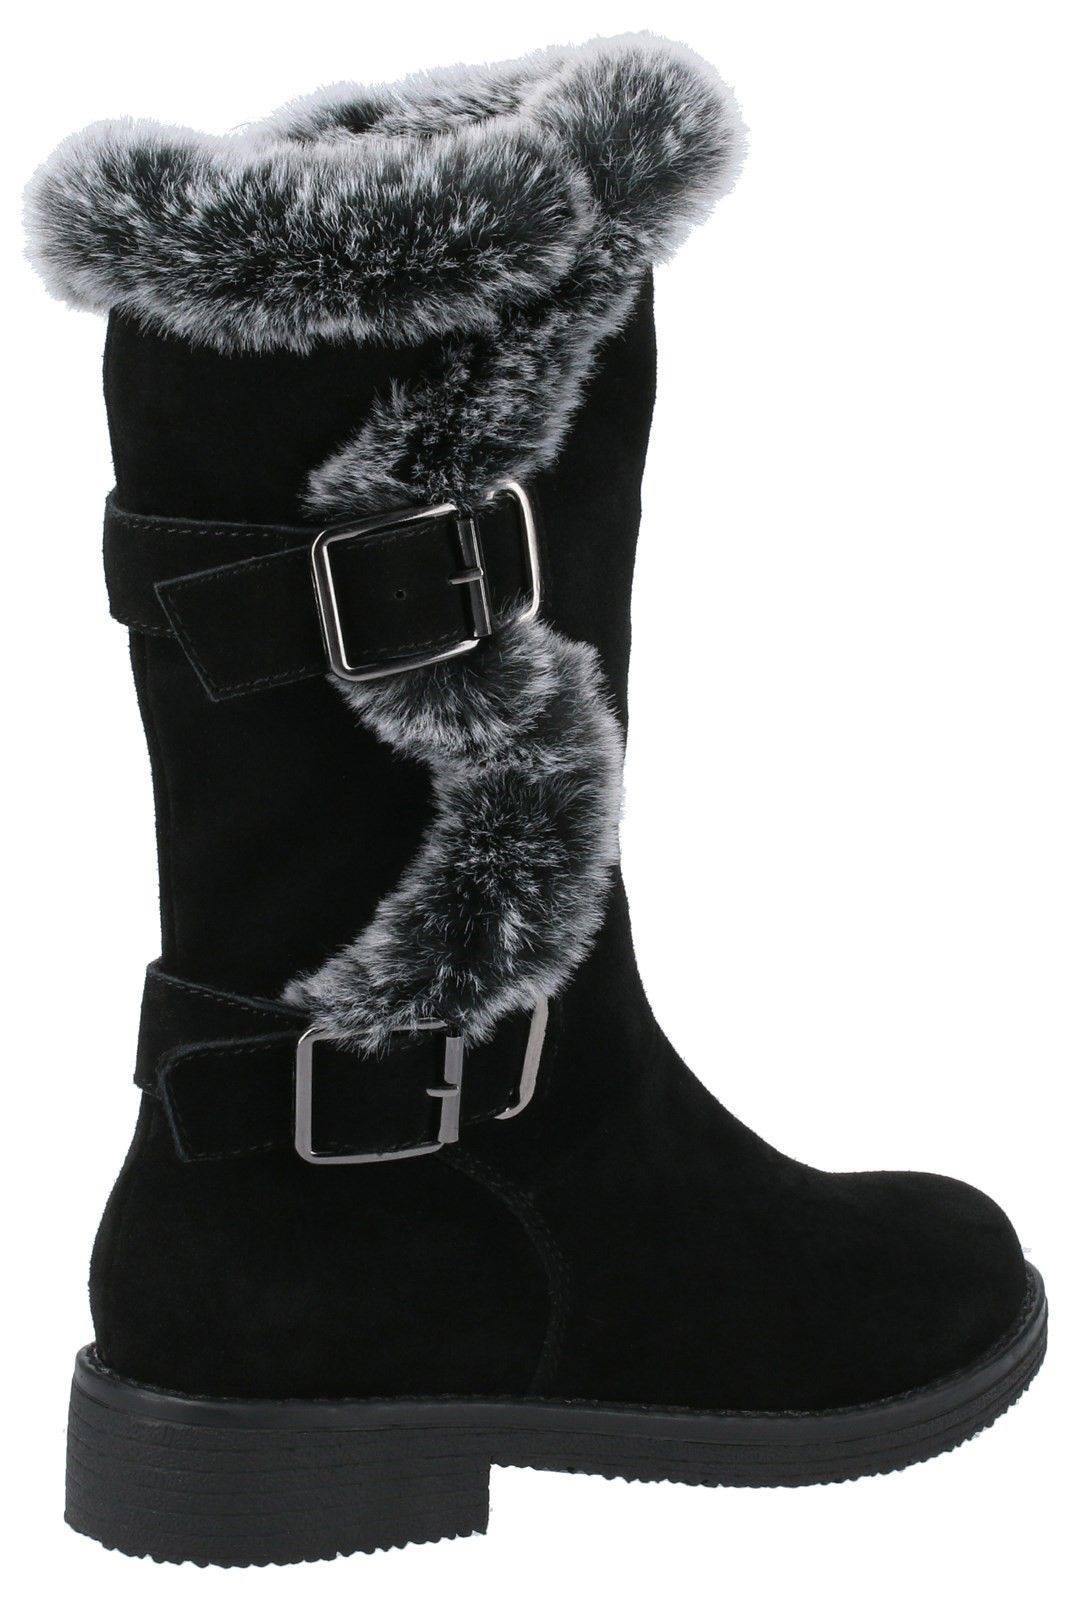 Women's cosy faux fur lined boot. Megan has a water-resistant real suede upper with warm fleece lining. Features cushion comfort memory foam leather insole and functioning inside zip, with flexible and hardwearing TPR outsole.Water resistant real suede and faux fur upper. 
Cosy fleece lining with soft faux fur collar. 
Cushion comfort memory foam leather insole. 
Functioning inside zip. 
Flexible and hardwearing TPR sole.